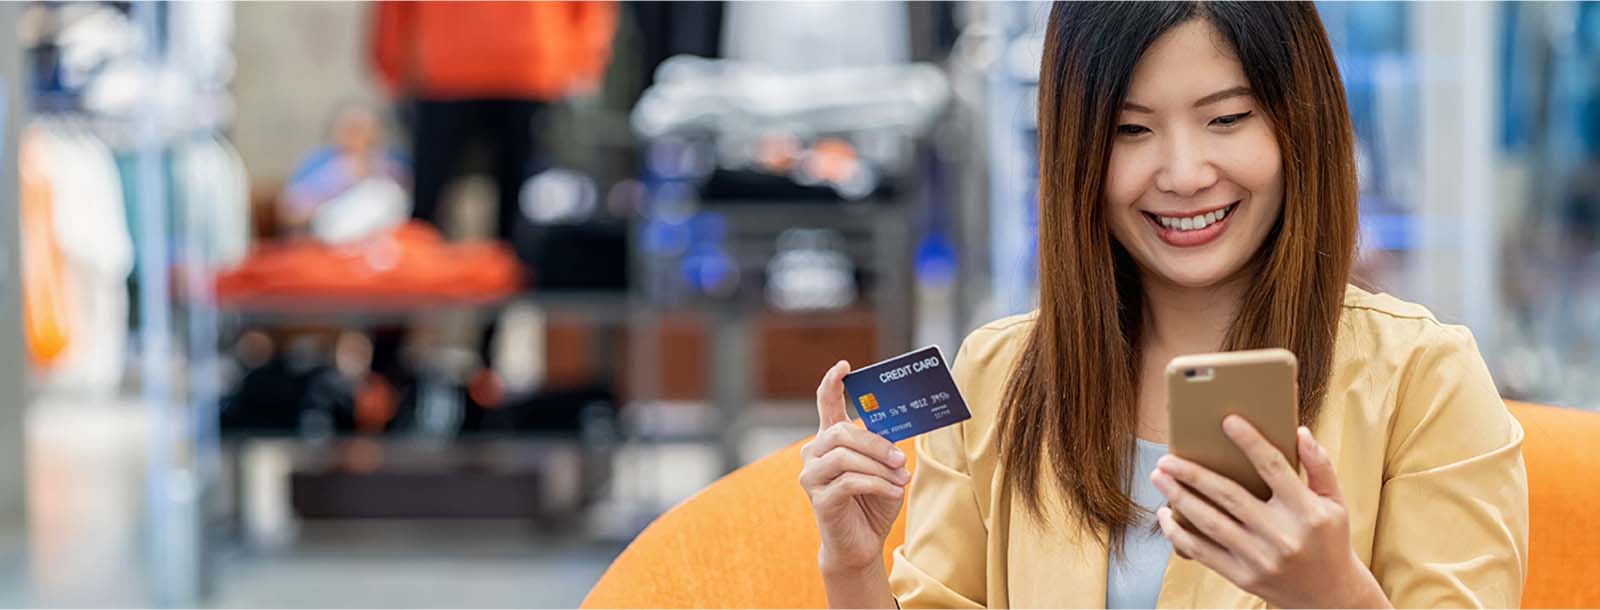 Lady looking at cell phone and holding a debit card